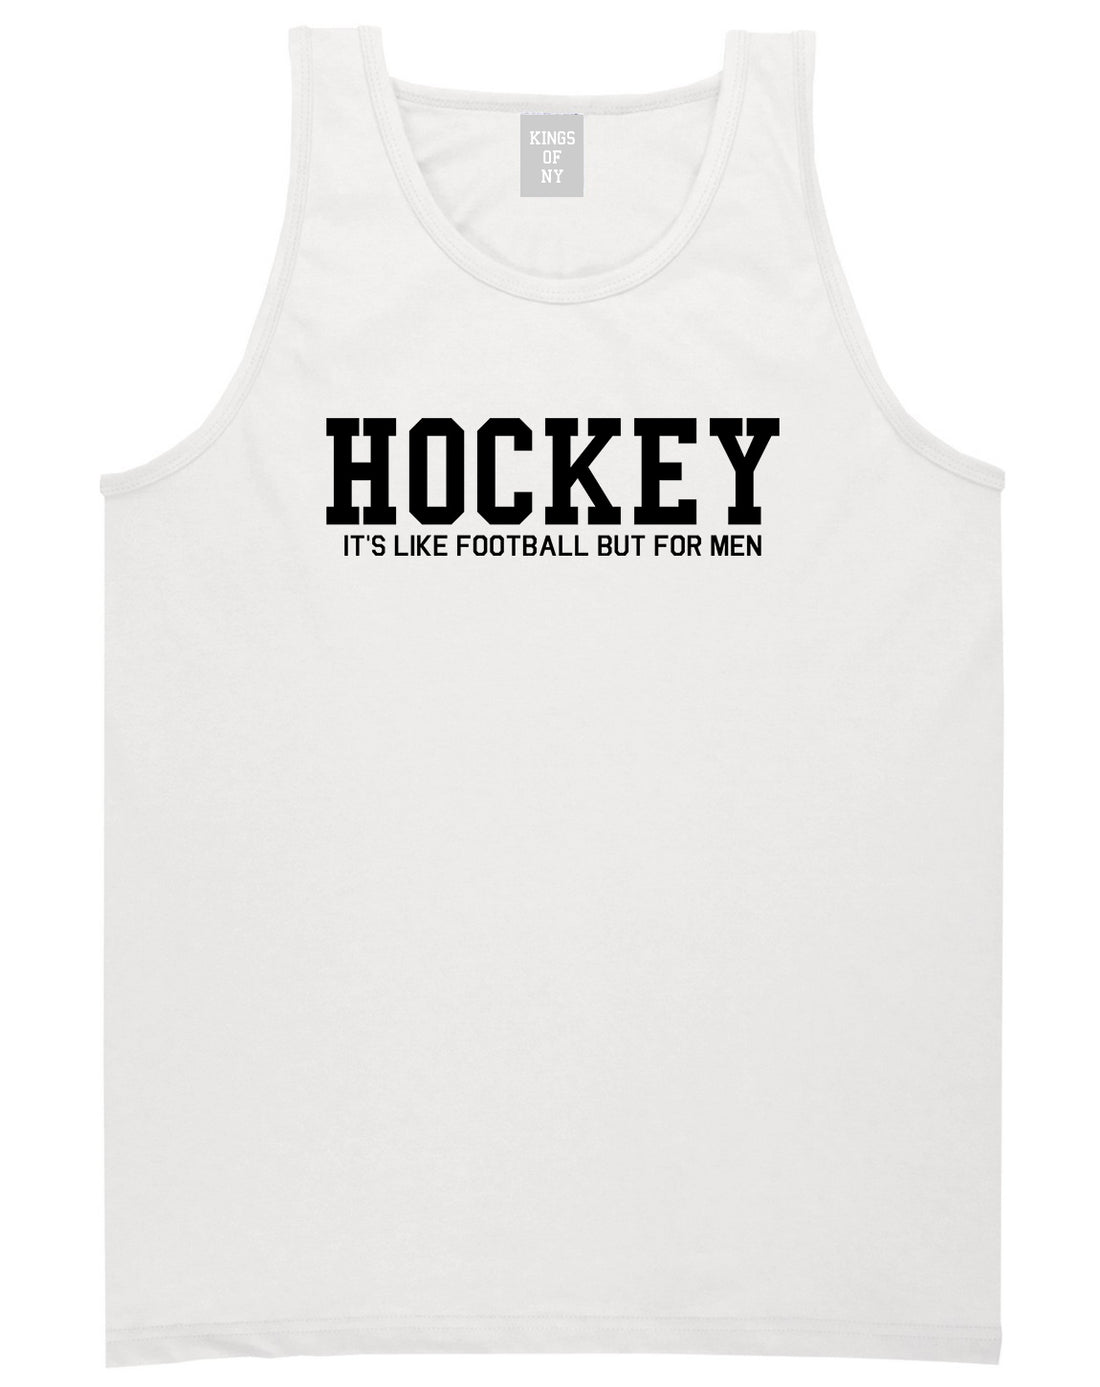 Hockey Its Like Football But For Men Funny Mens Tank Top T-Shirt White